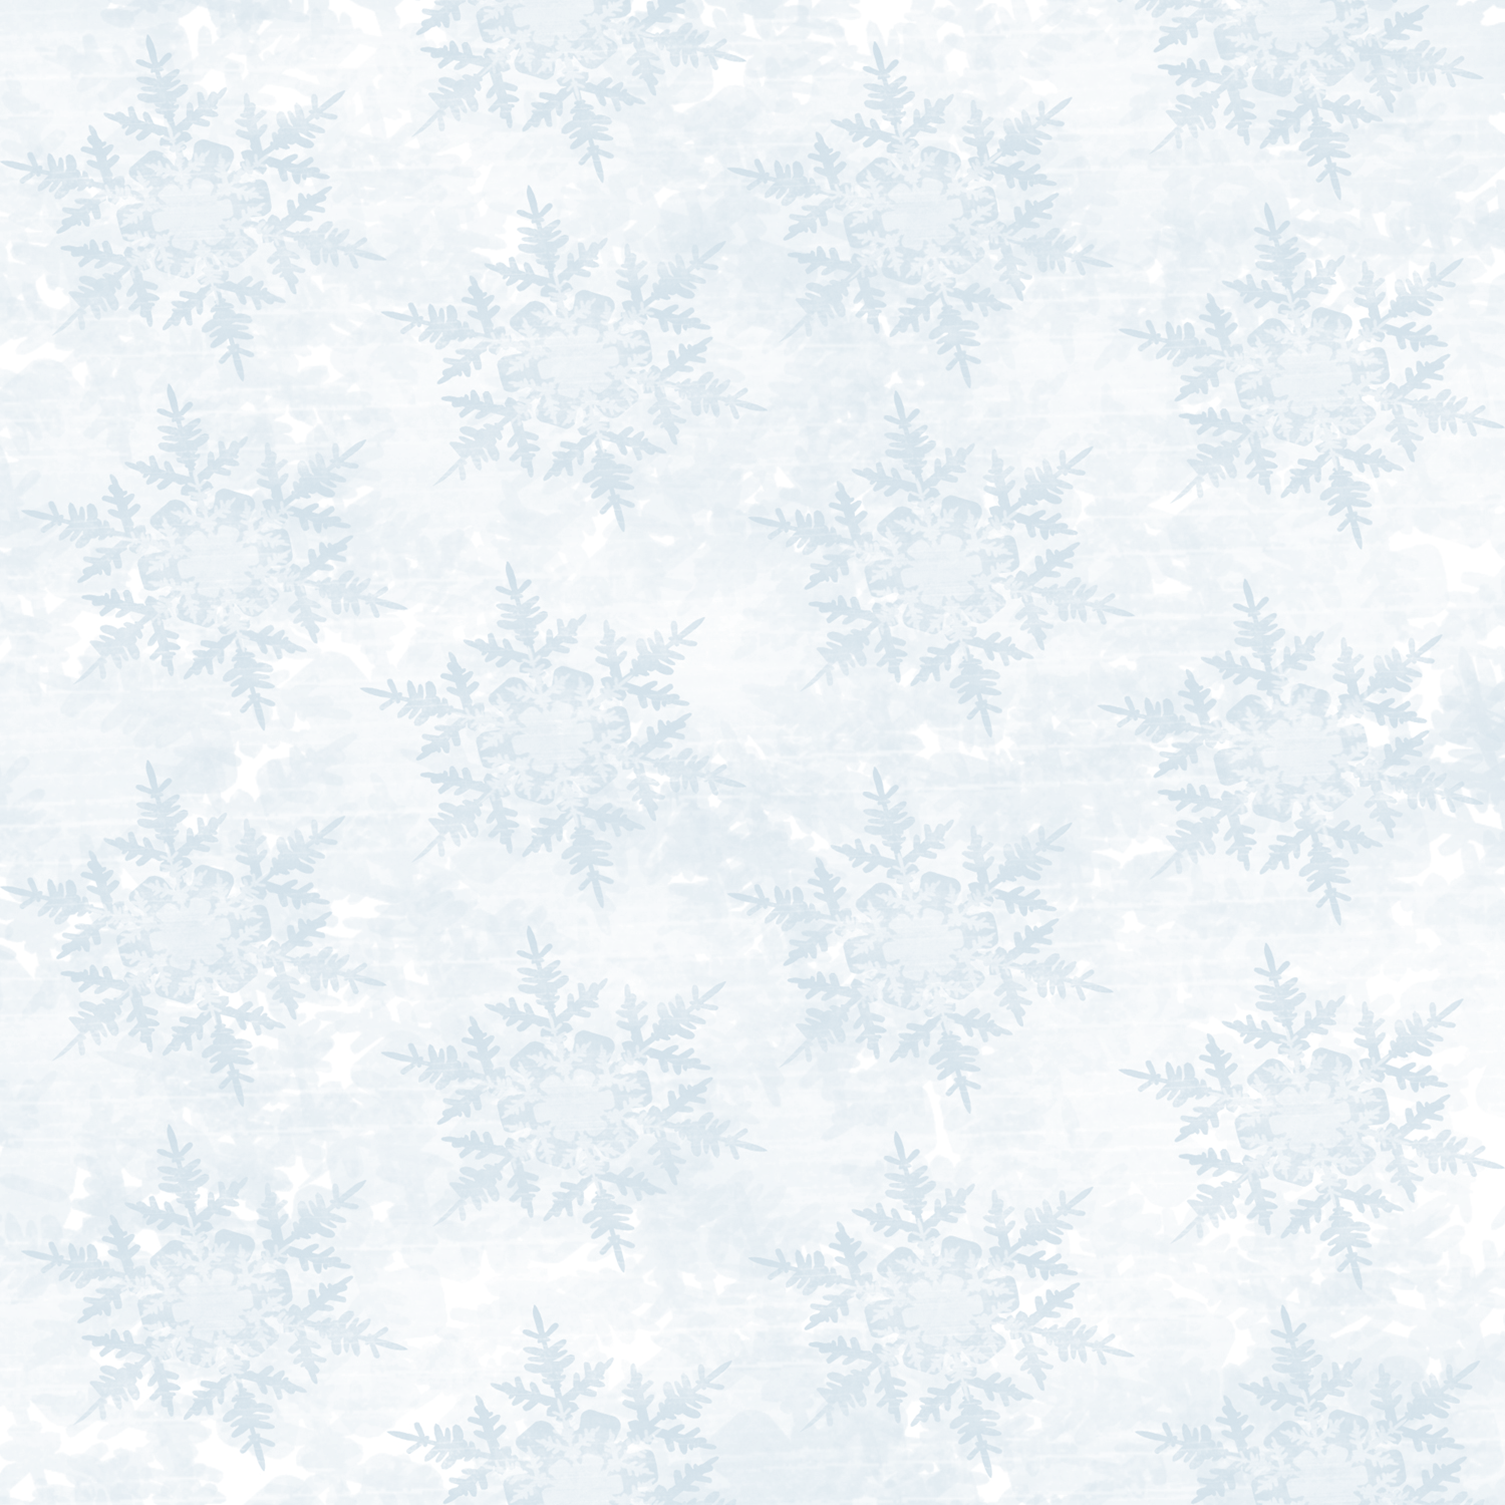 Snowflake Background Png